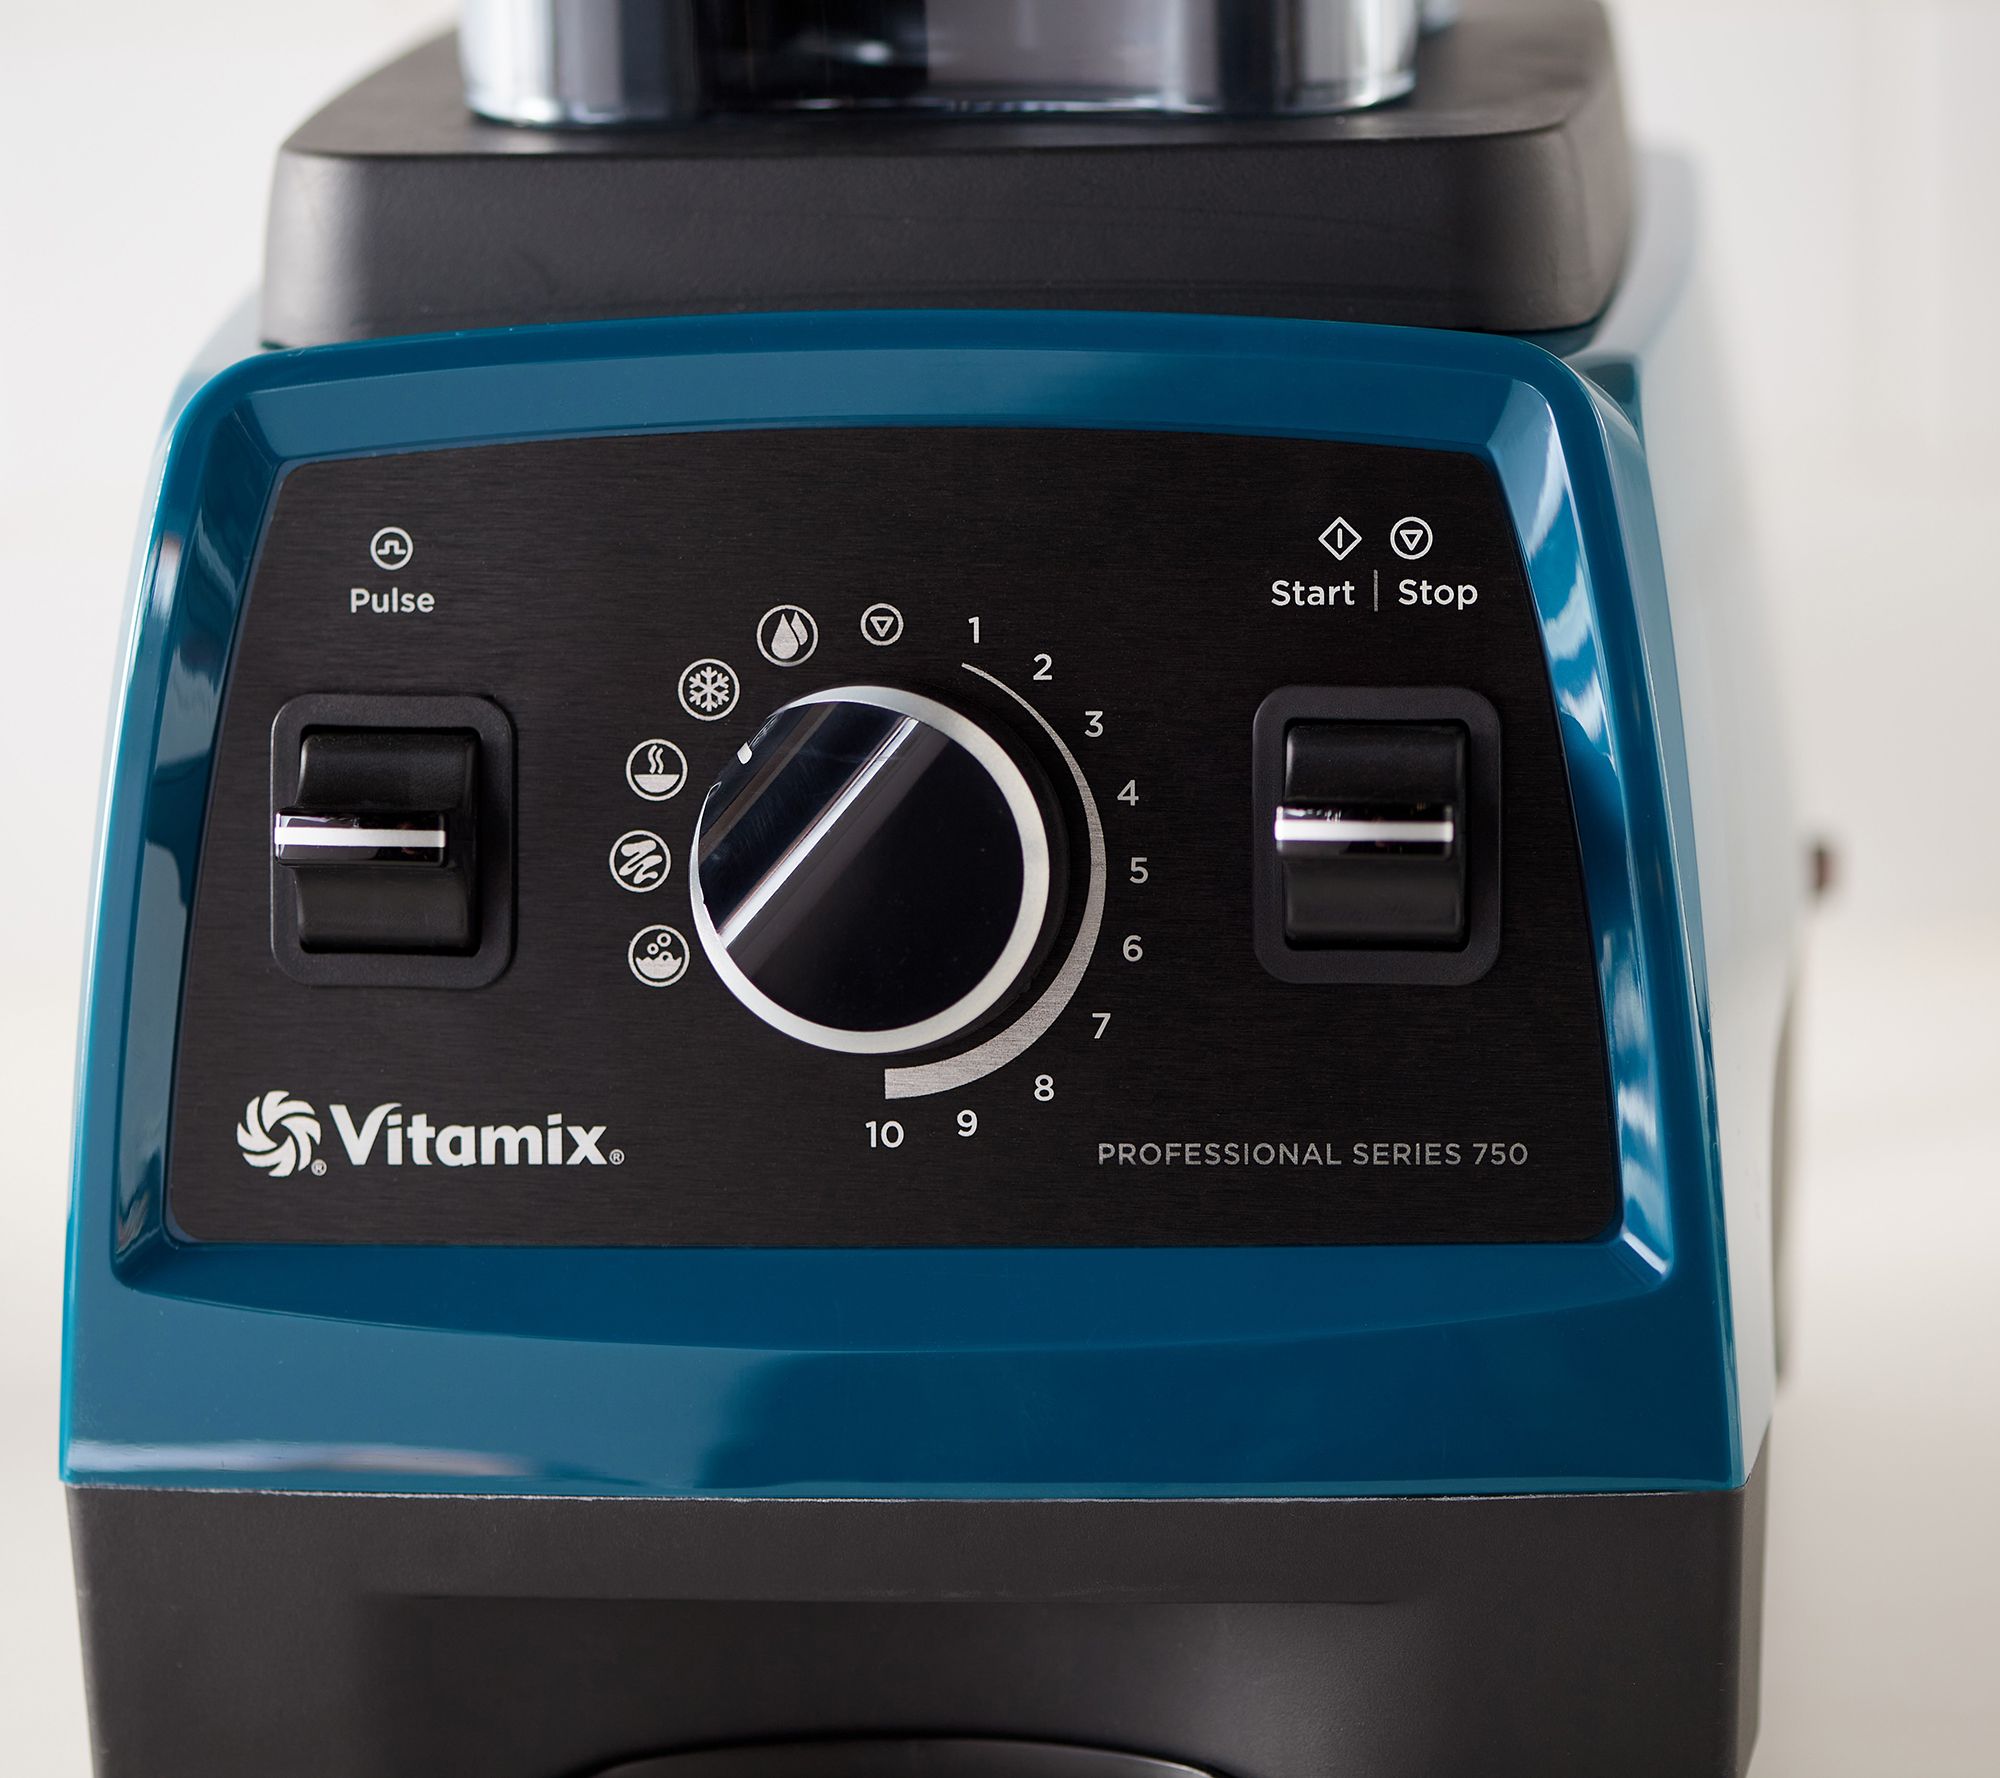 Vitamix spring sale offers up to $100 off pro-grade blenders, FREE apron,  more from $125